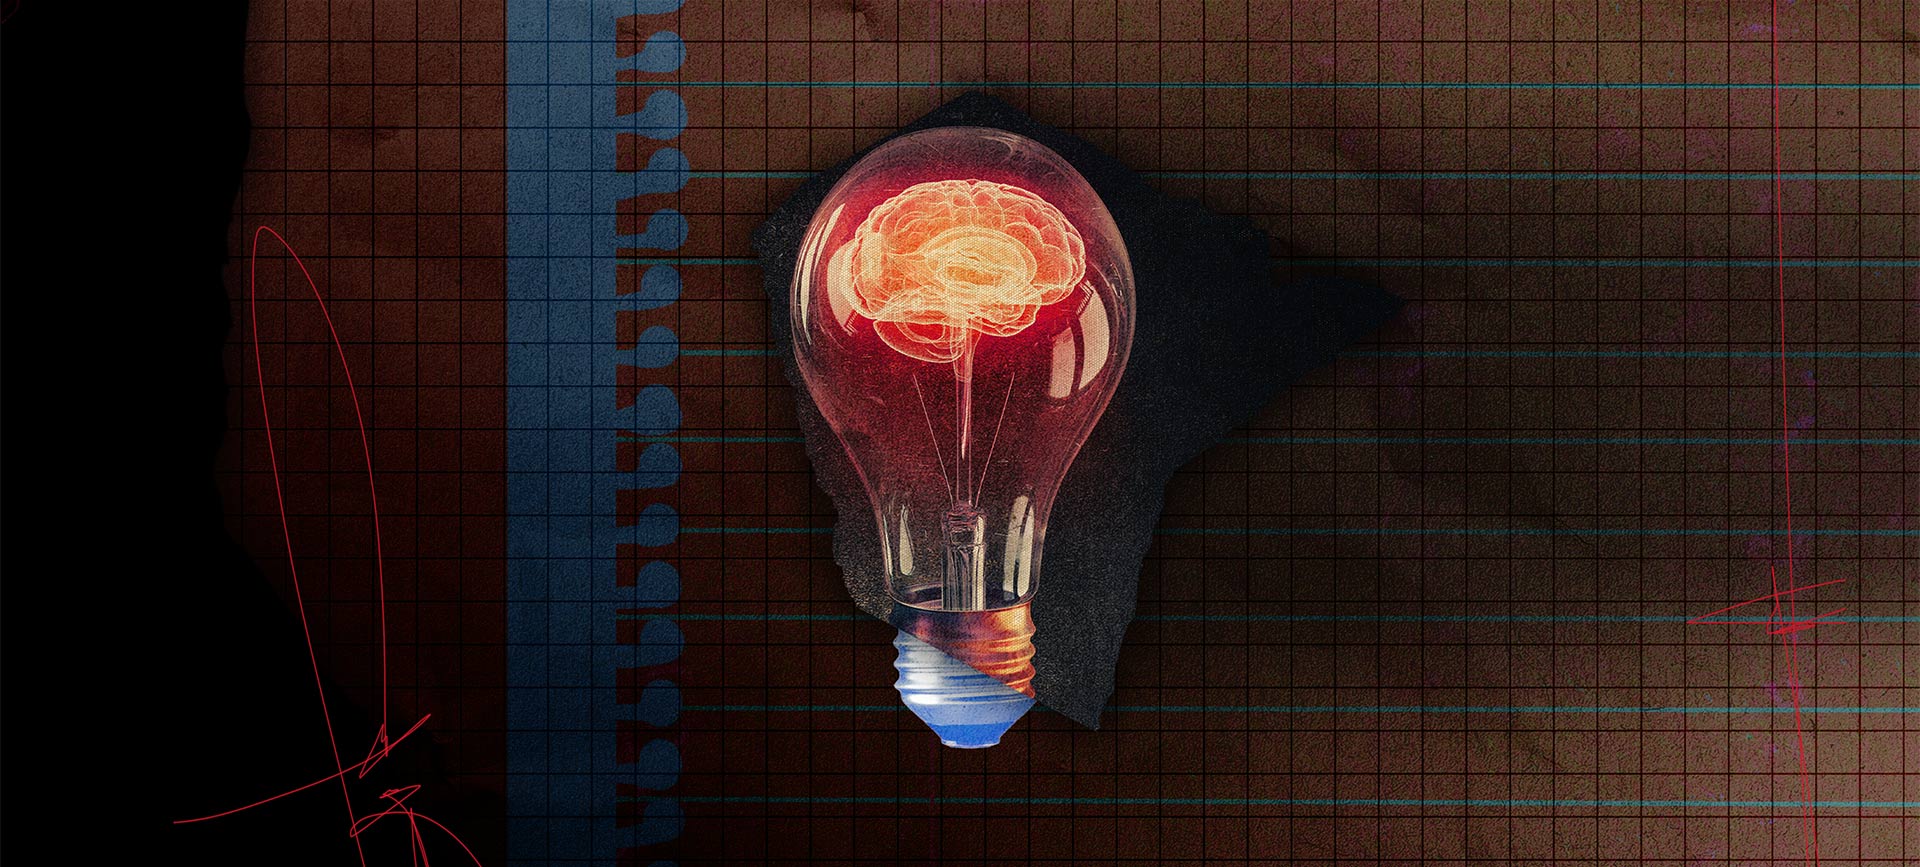 A layered collage shows a lightbulb with the wires inside forming a brain.